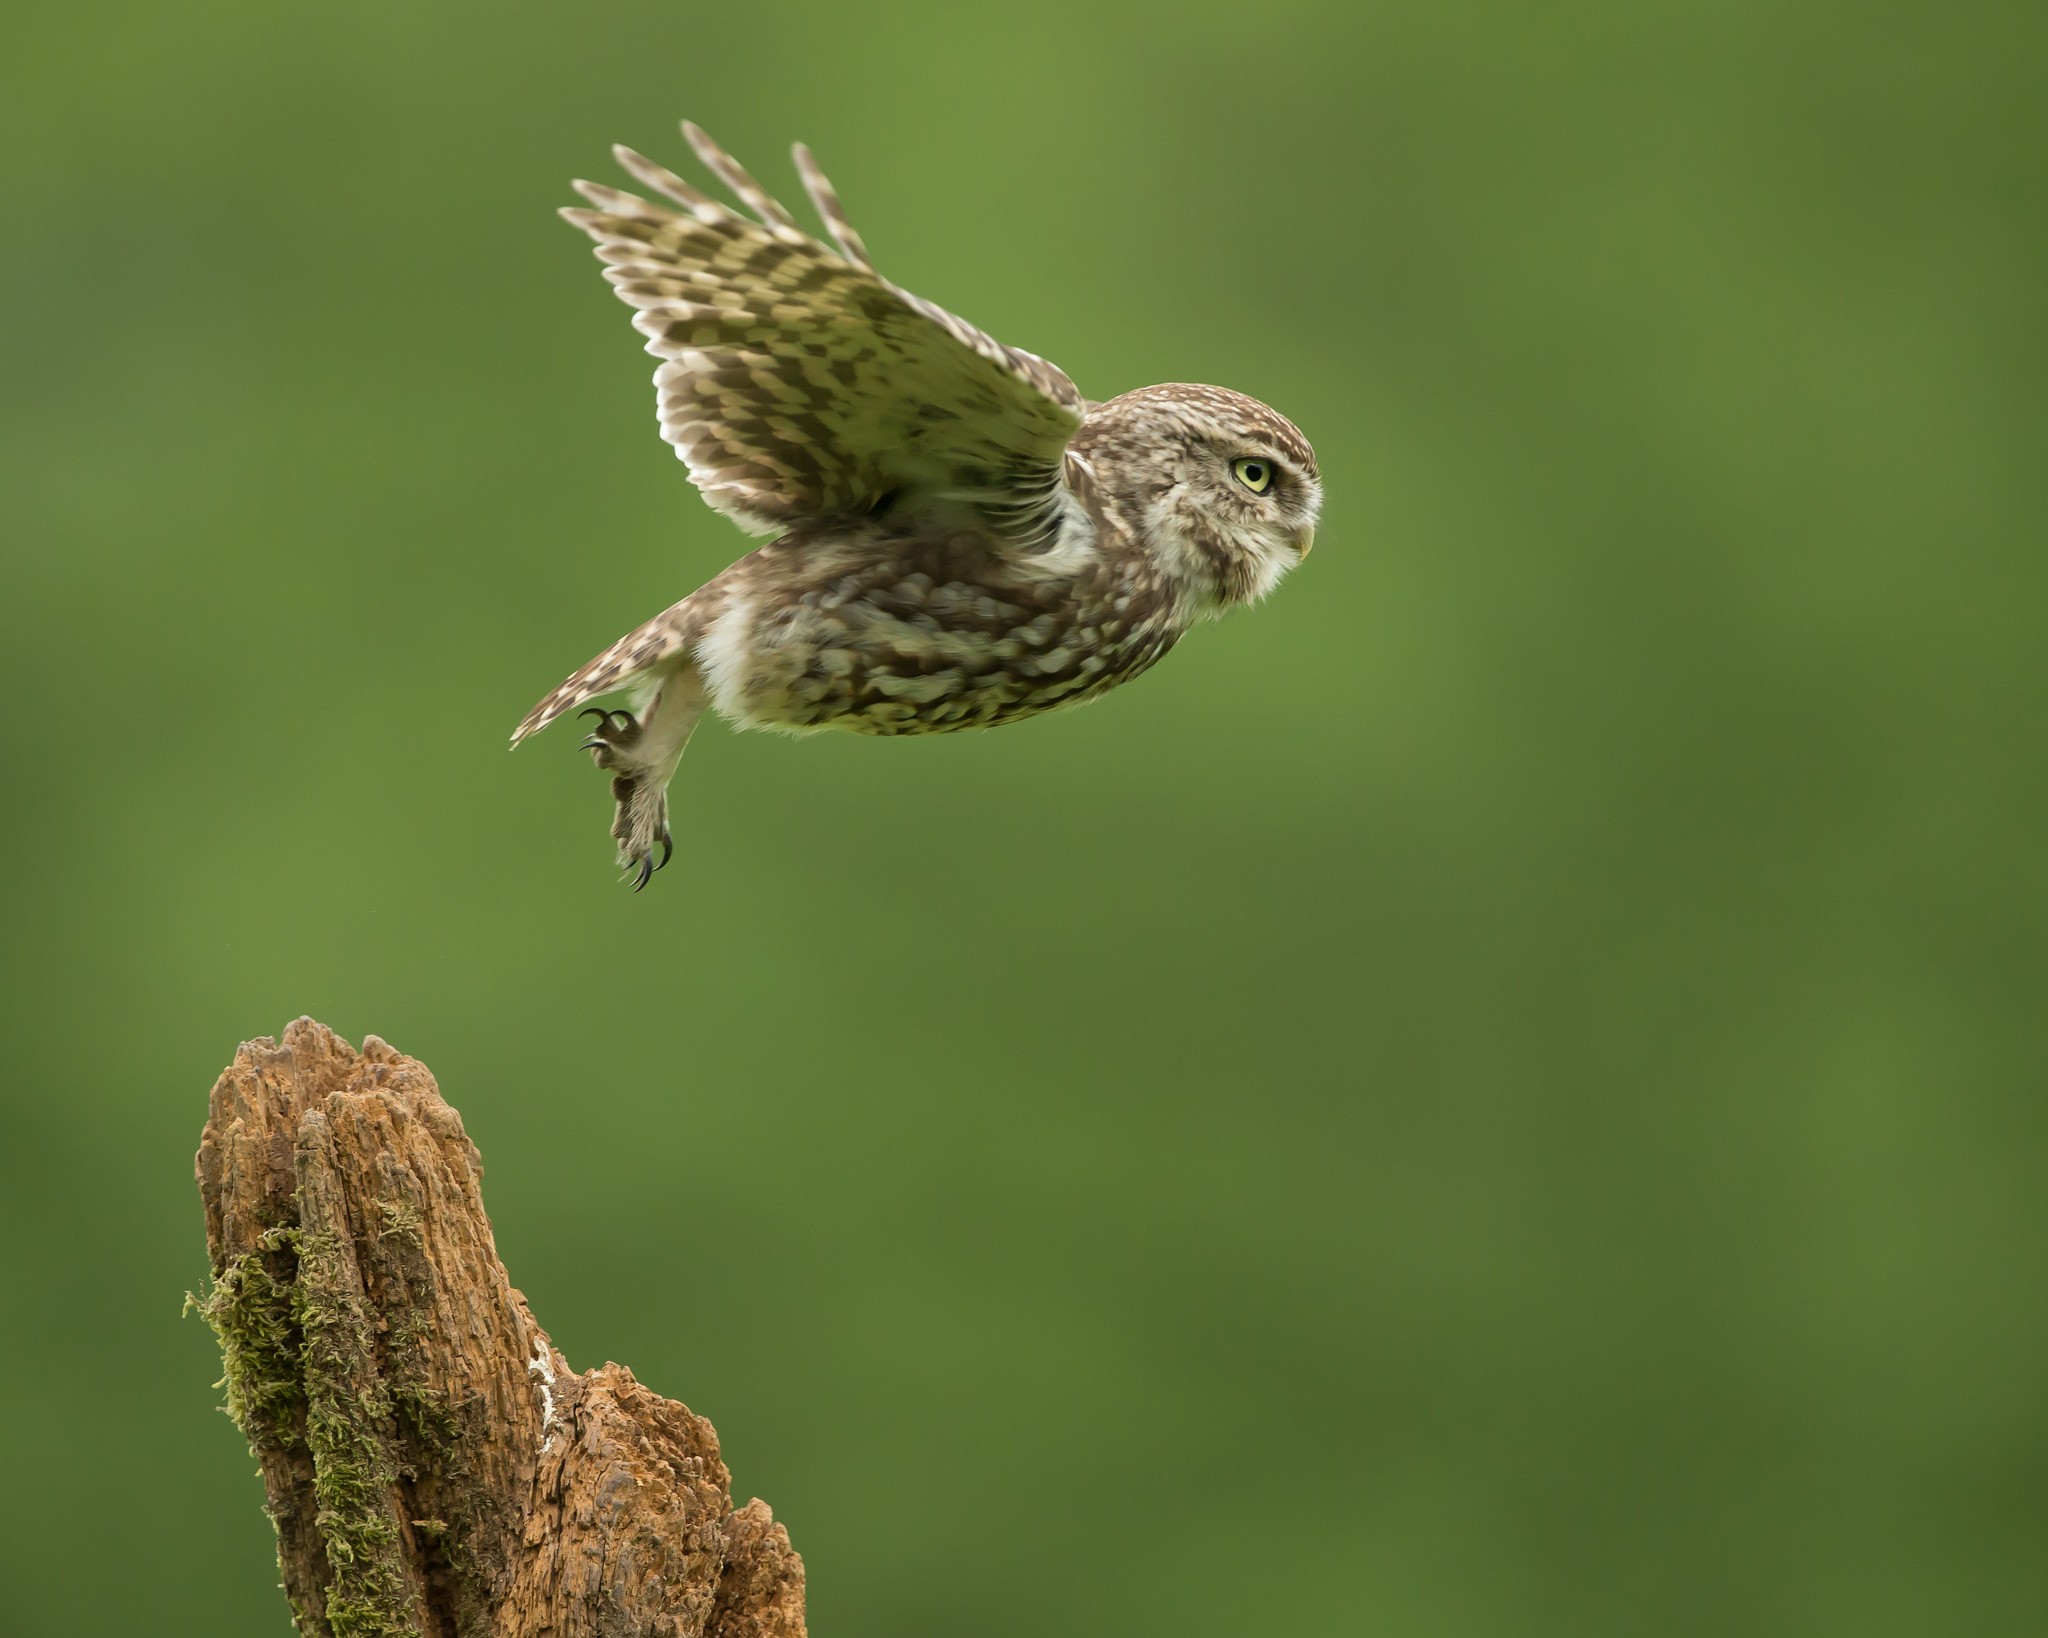 General 2048x1638 photography birds owl take-off macro animals green background wings flying